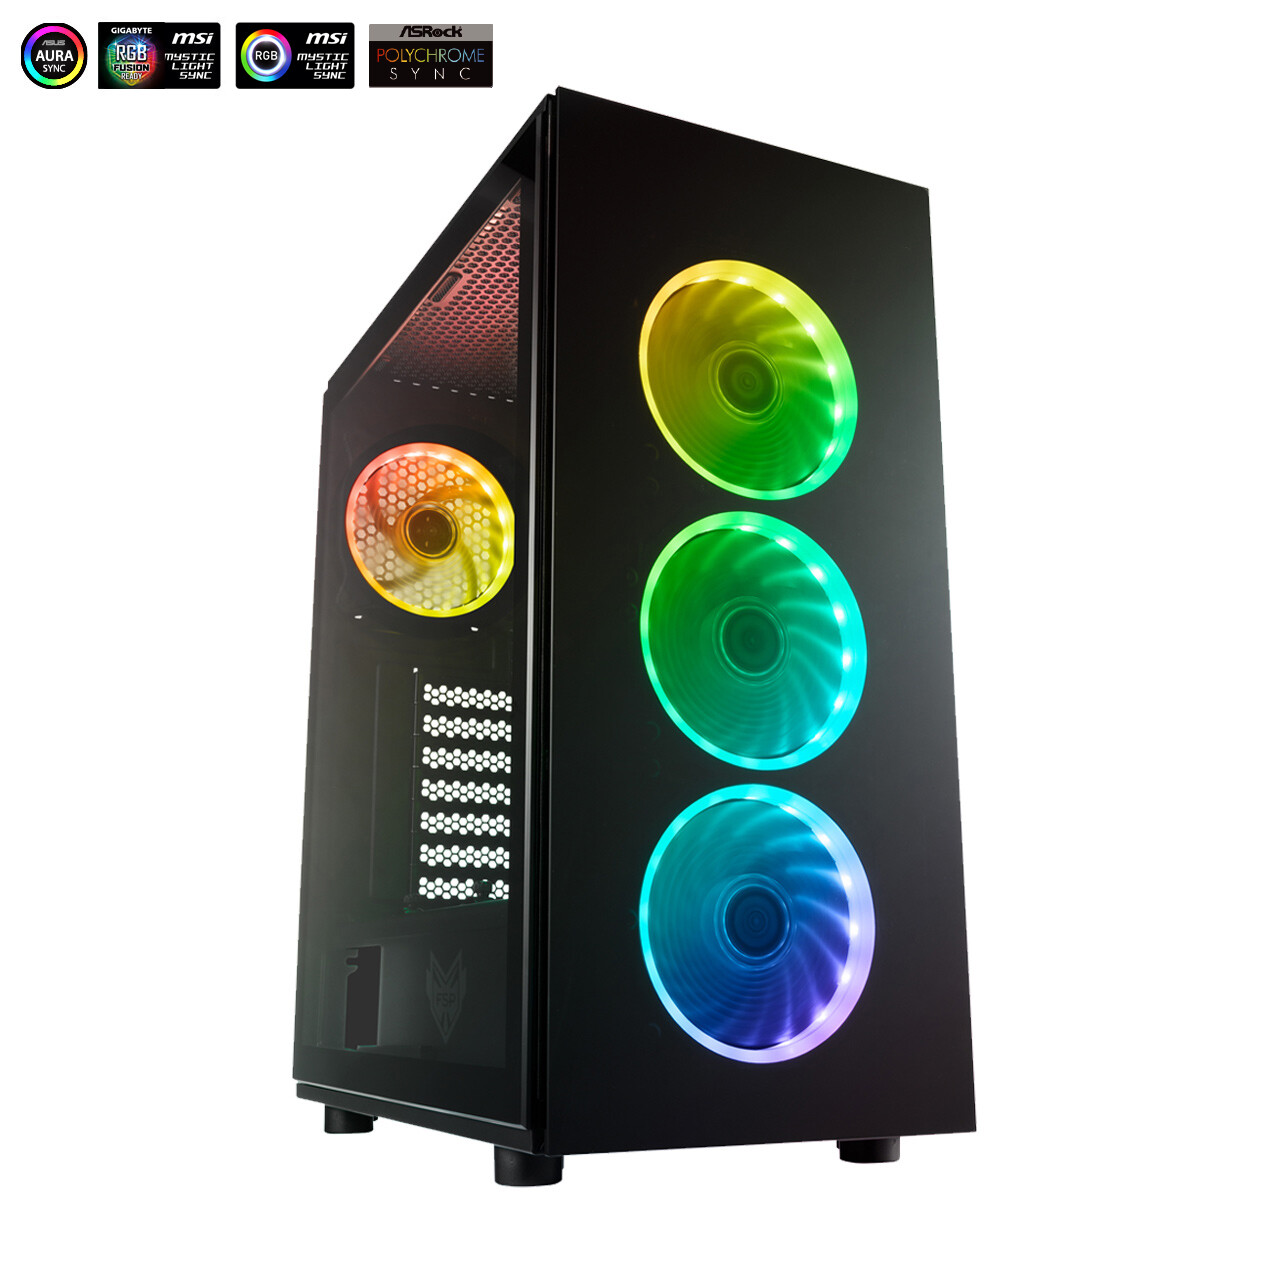 FSP CMT340 RGB Tempered Glass Case